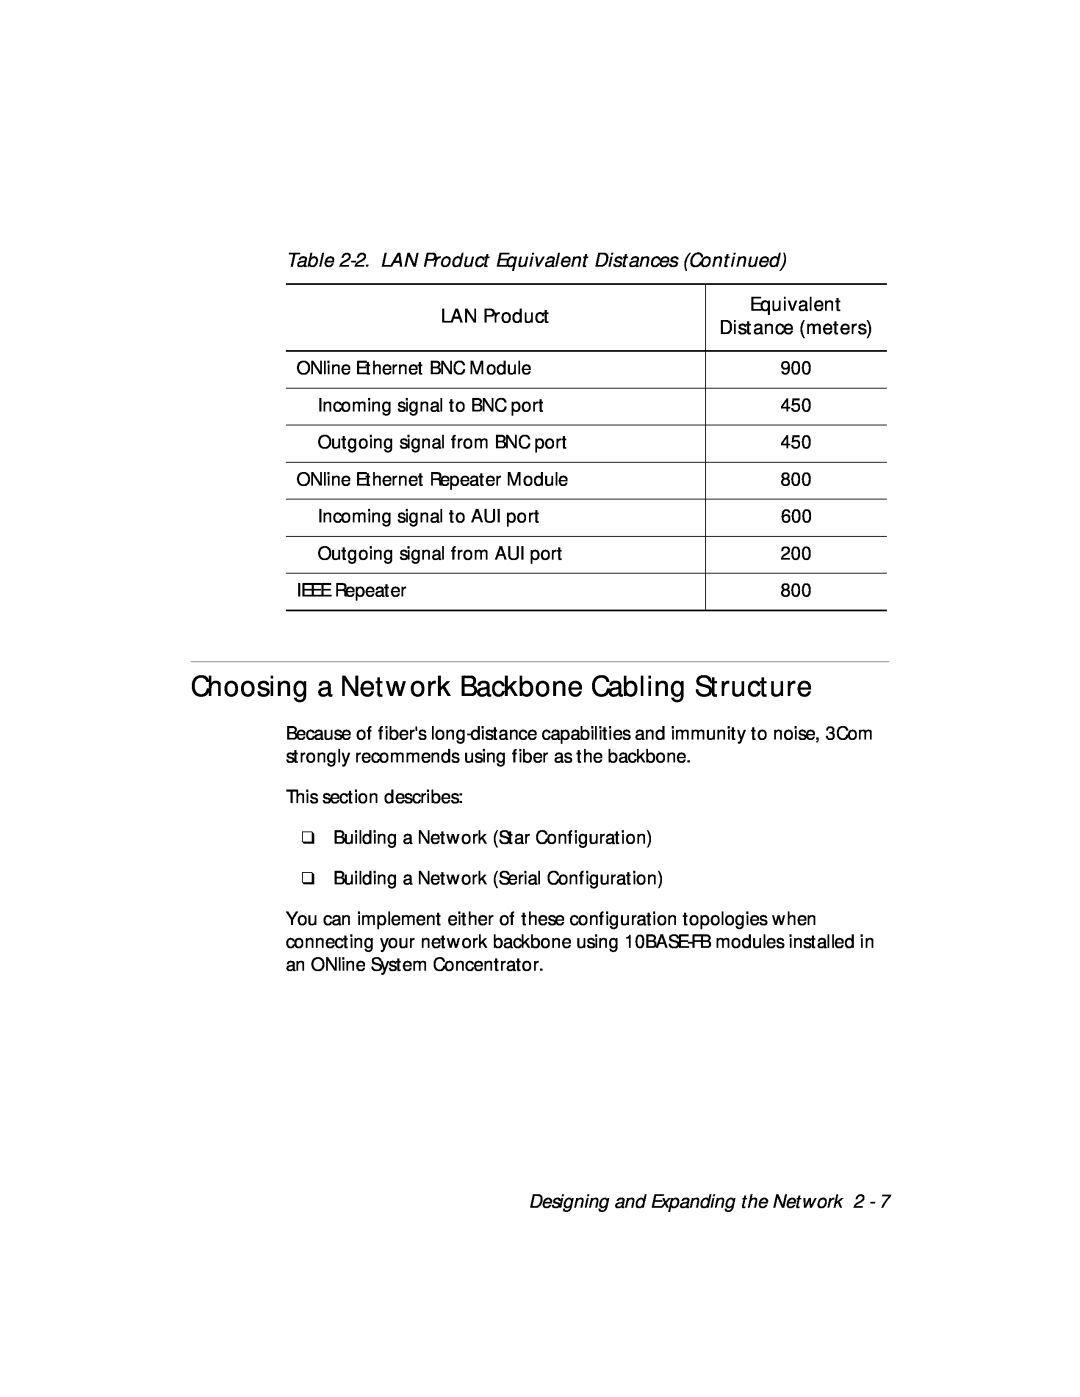 3Com 5124M-TPCL manual Choosing a Network Backbone Cabling Structure, 2. LAN Product Equivalent Distances Continued 